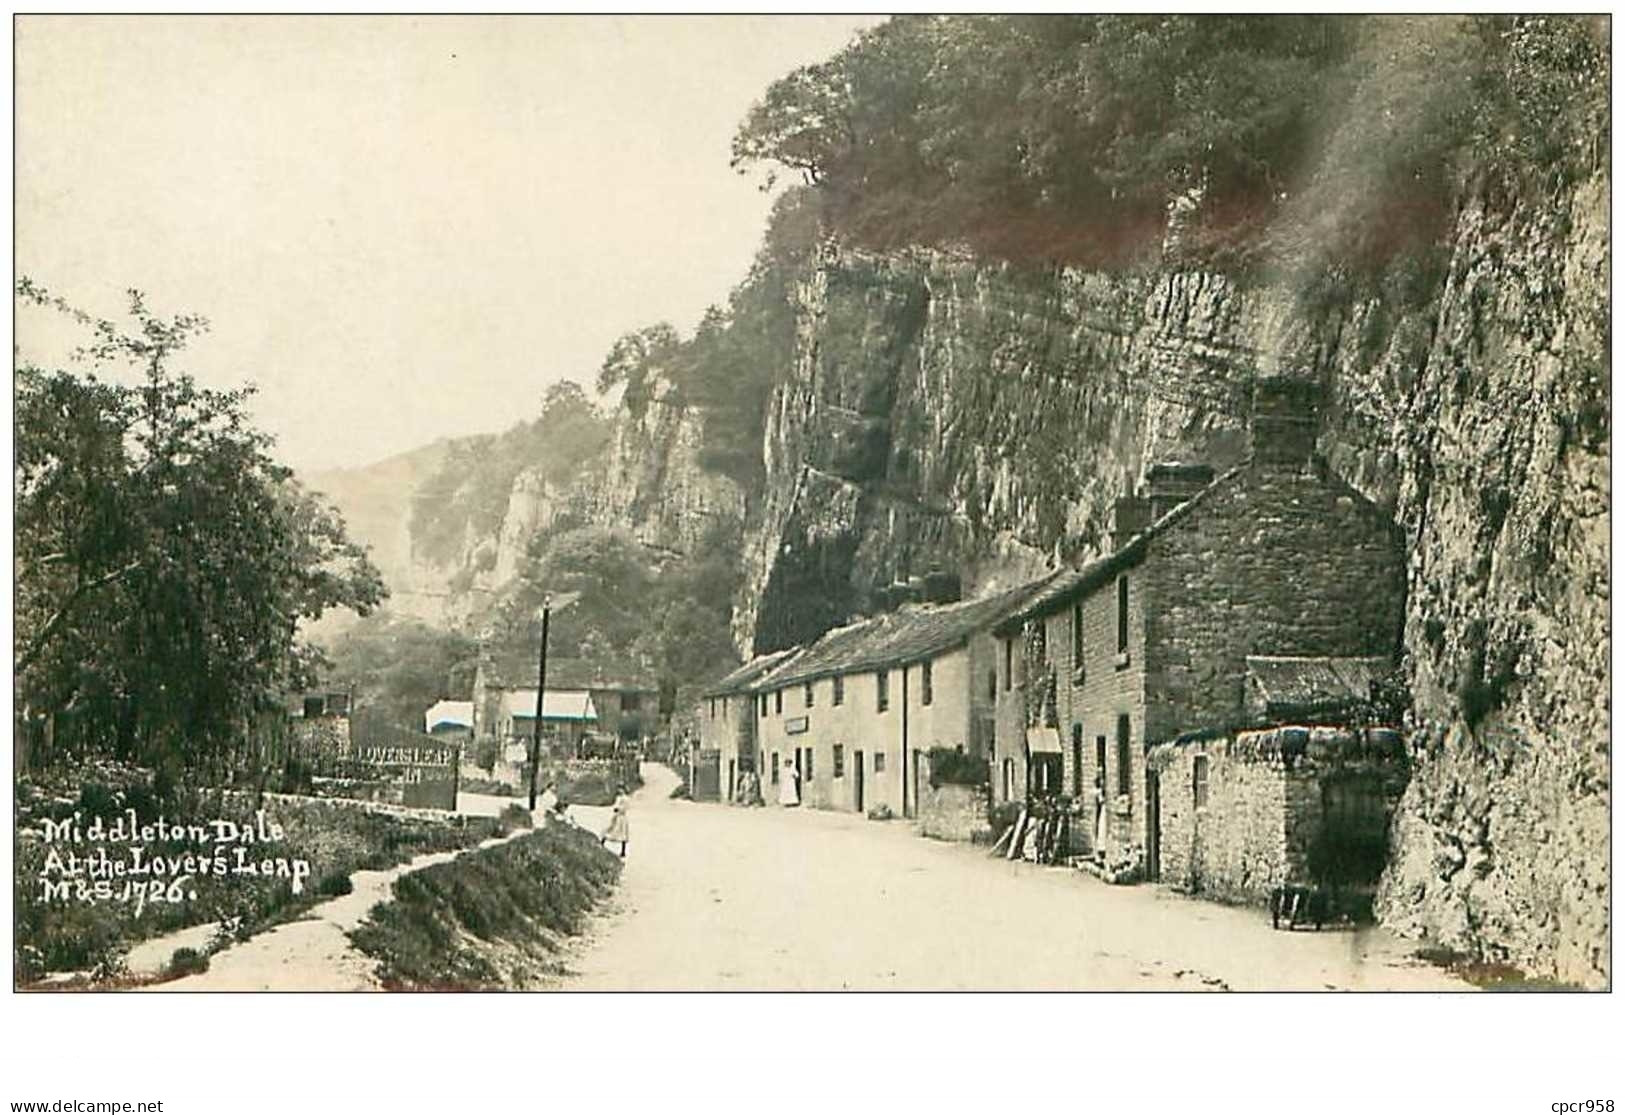 ROYAUME UNI.n°30643.ANGLETERRE.MIDDLETON DALE.AT THE LOVER'S LEAP.CP PHOTO - Derbyshire